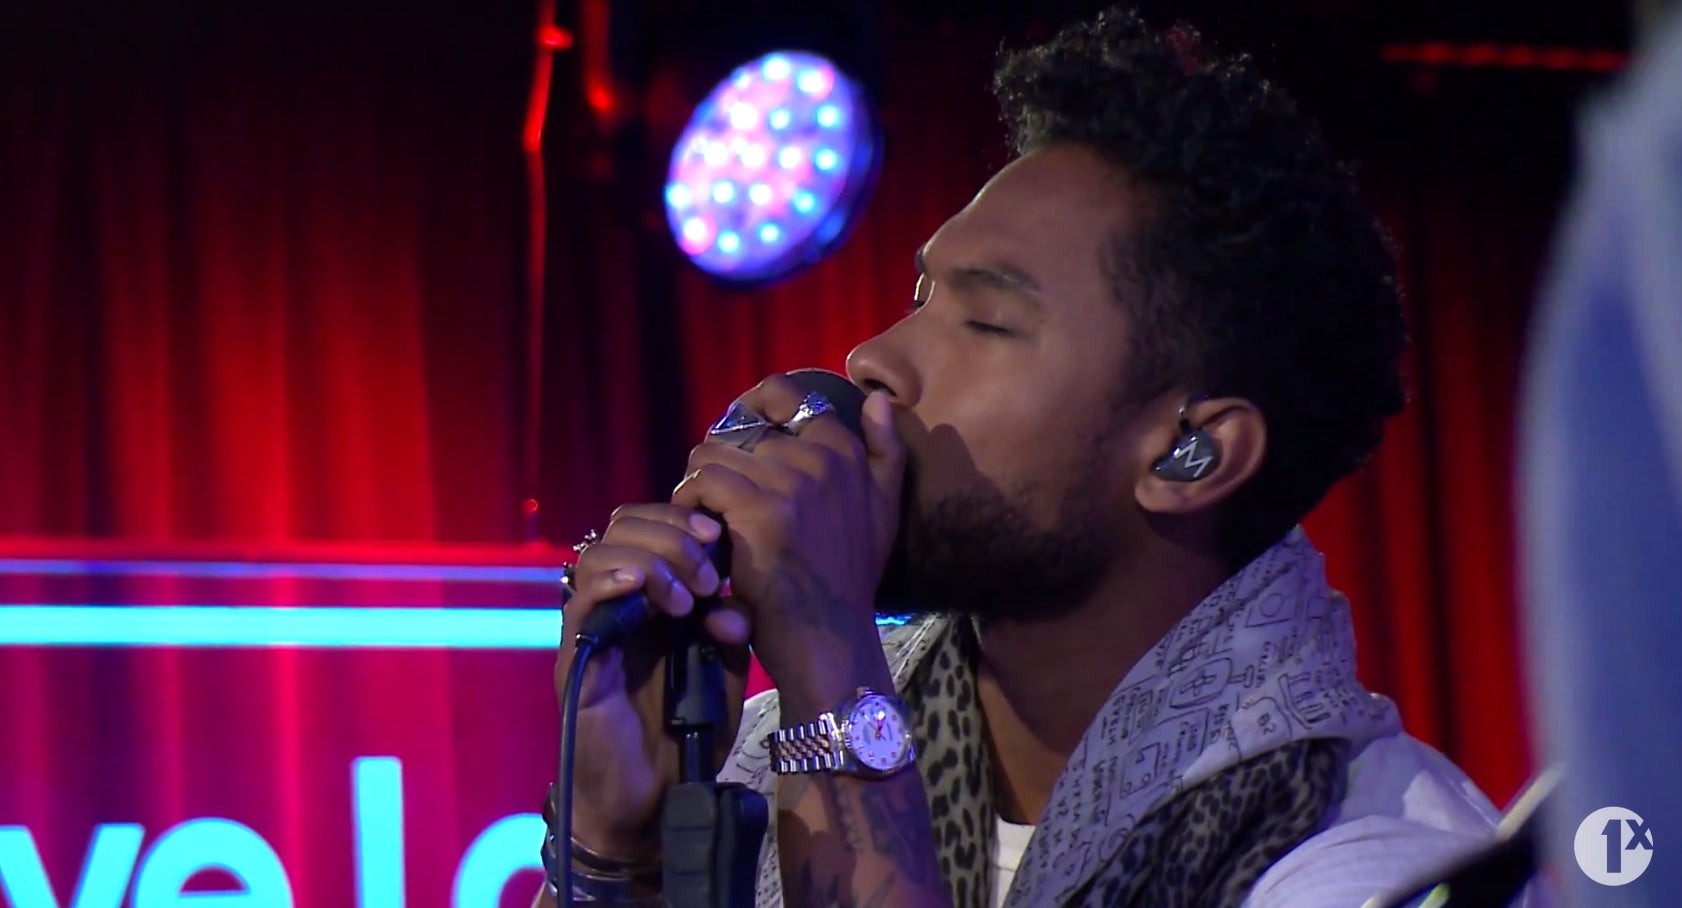 Watch Miguel Perform the Live Version of His Single, 'Coffee' on BBC